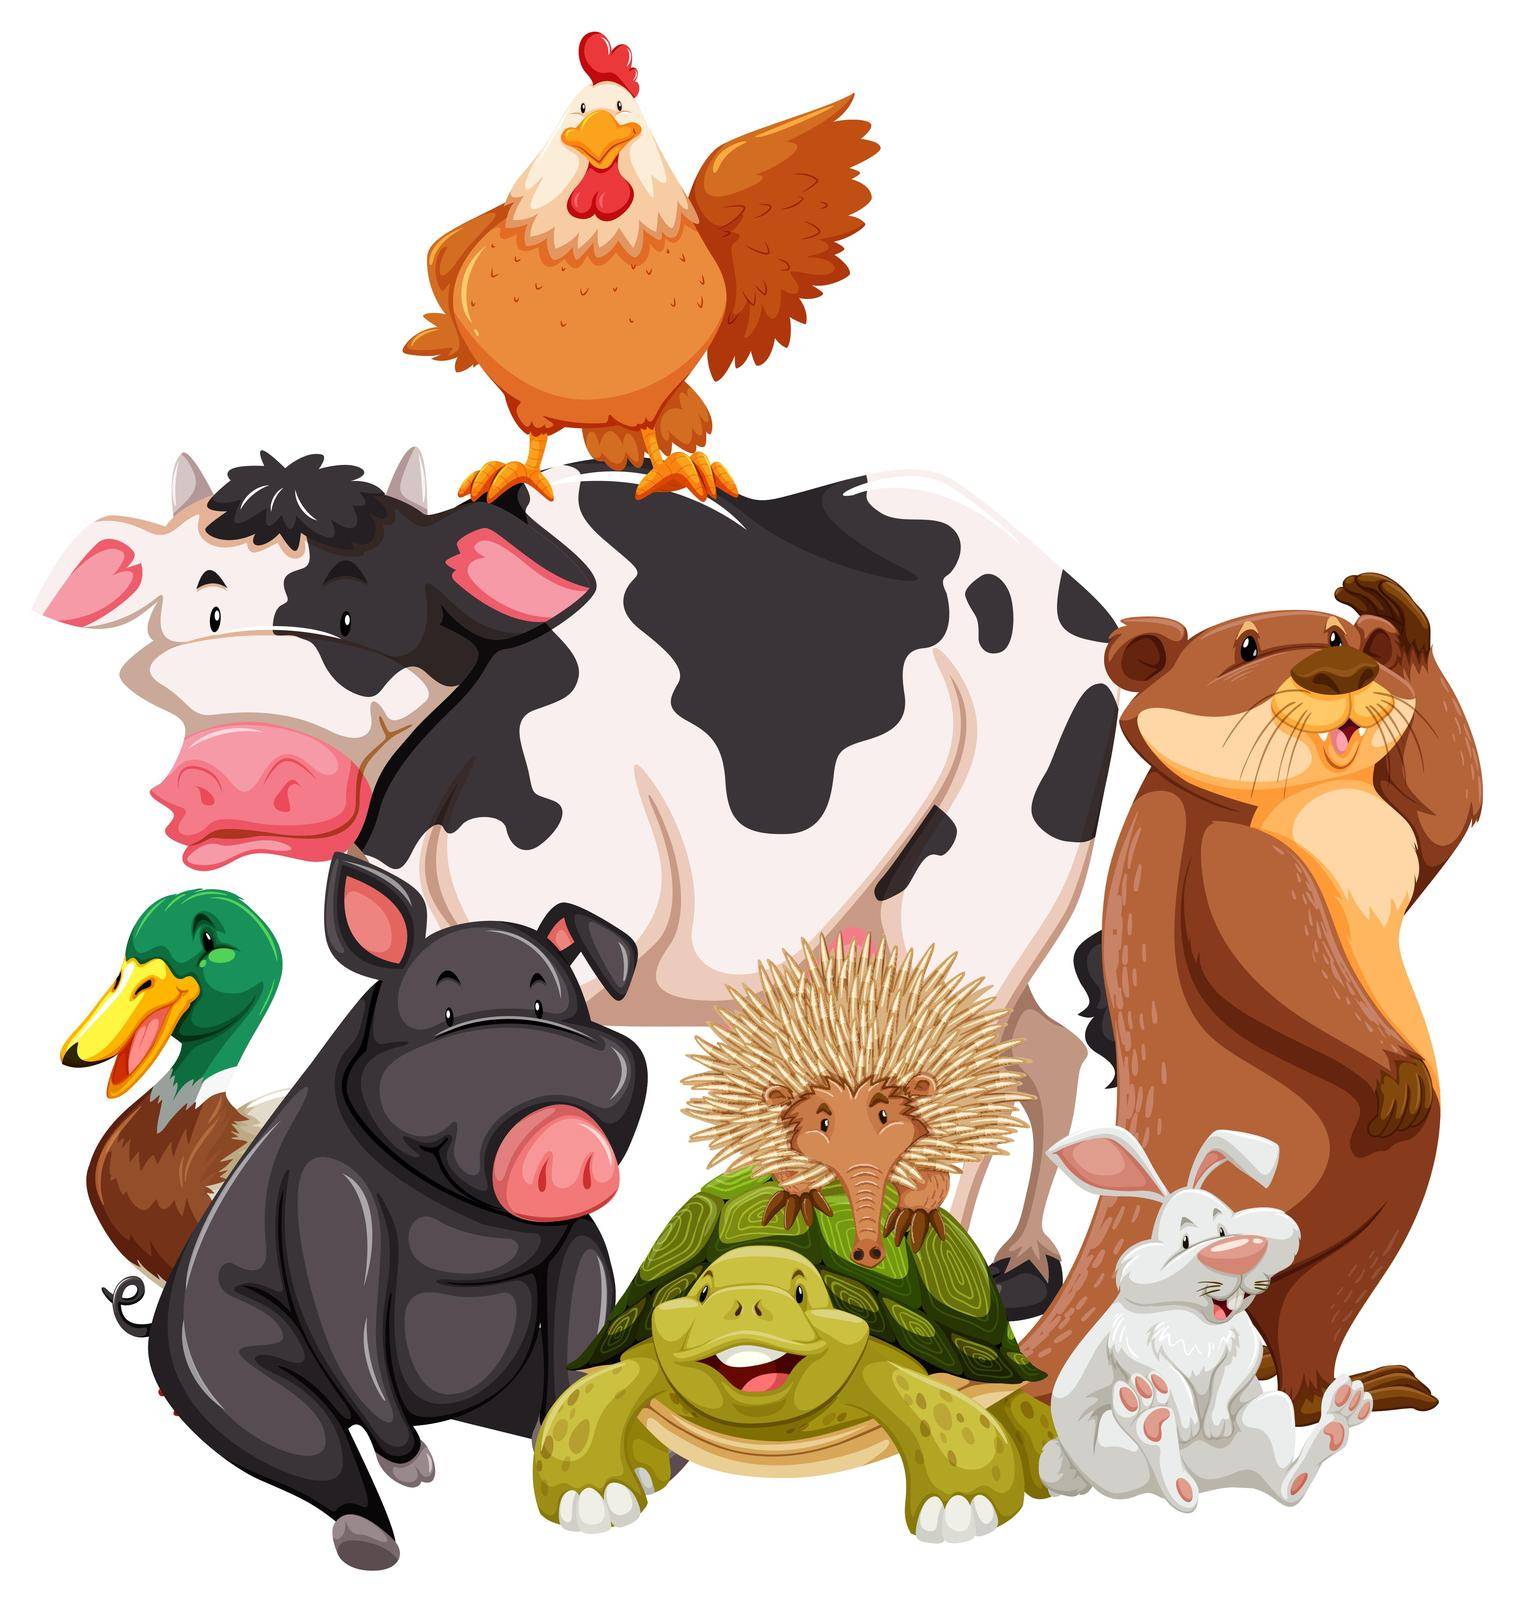 Group of animals on white background